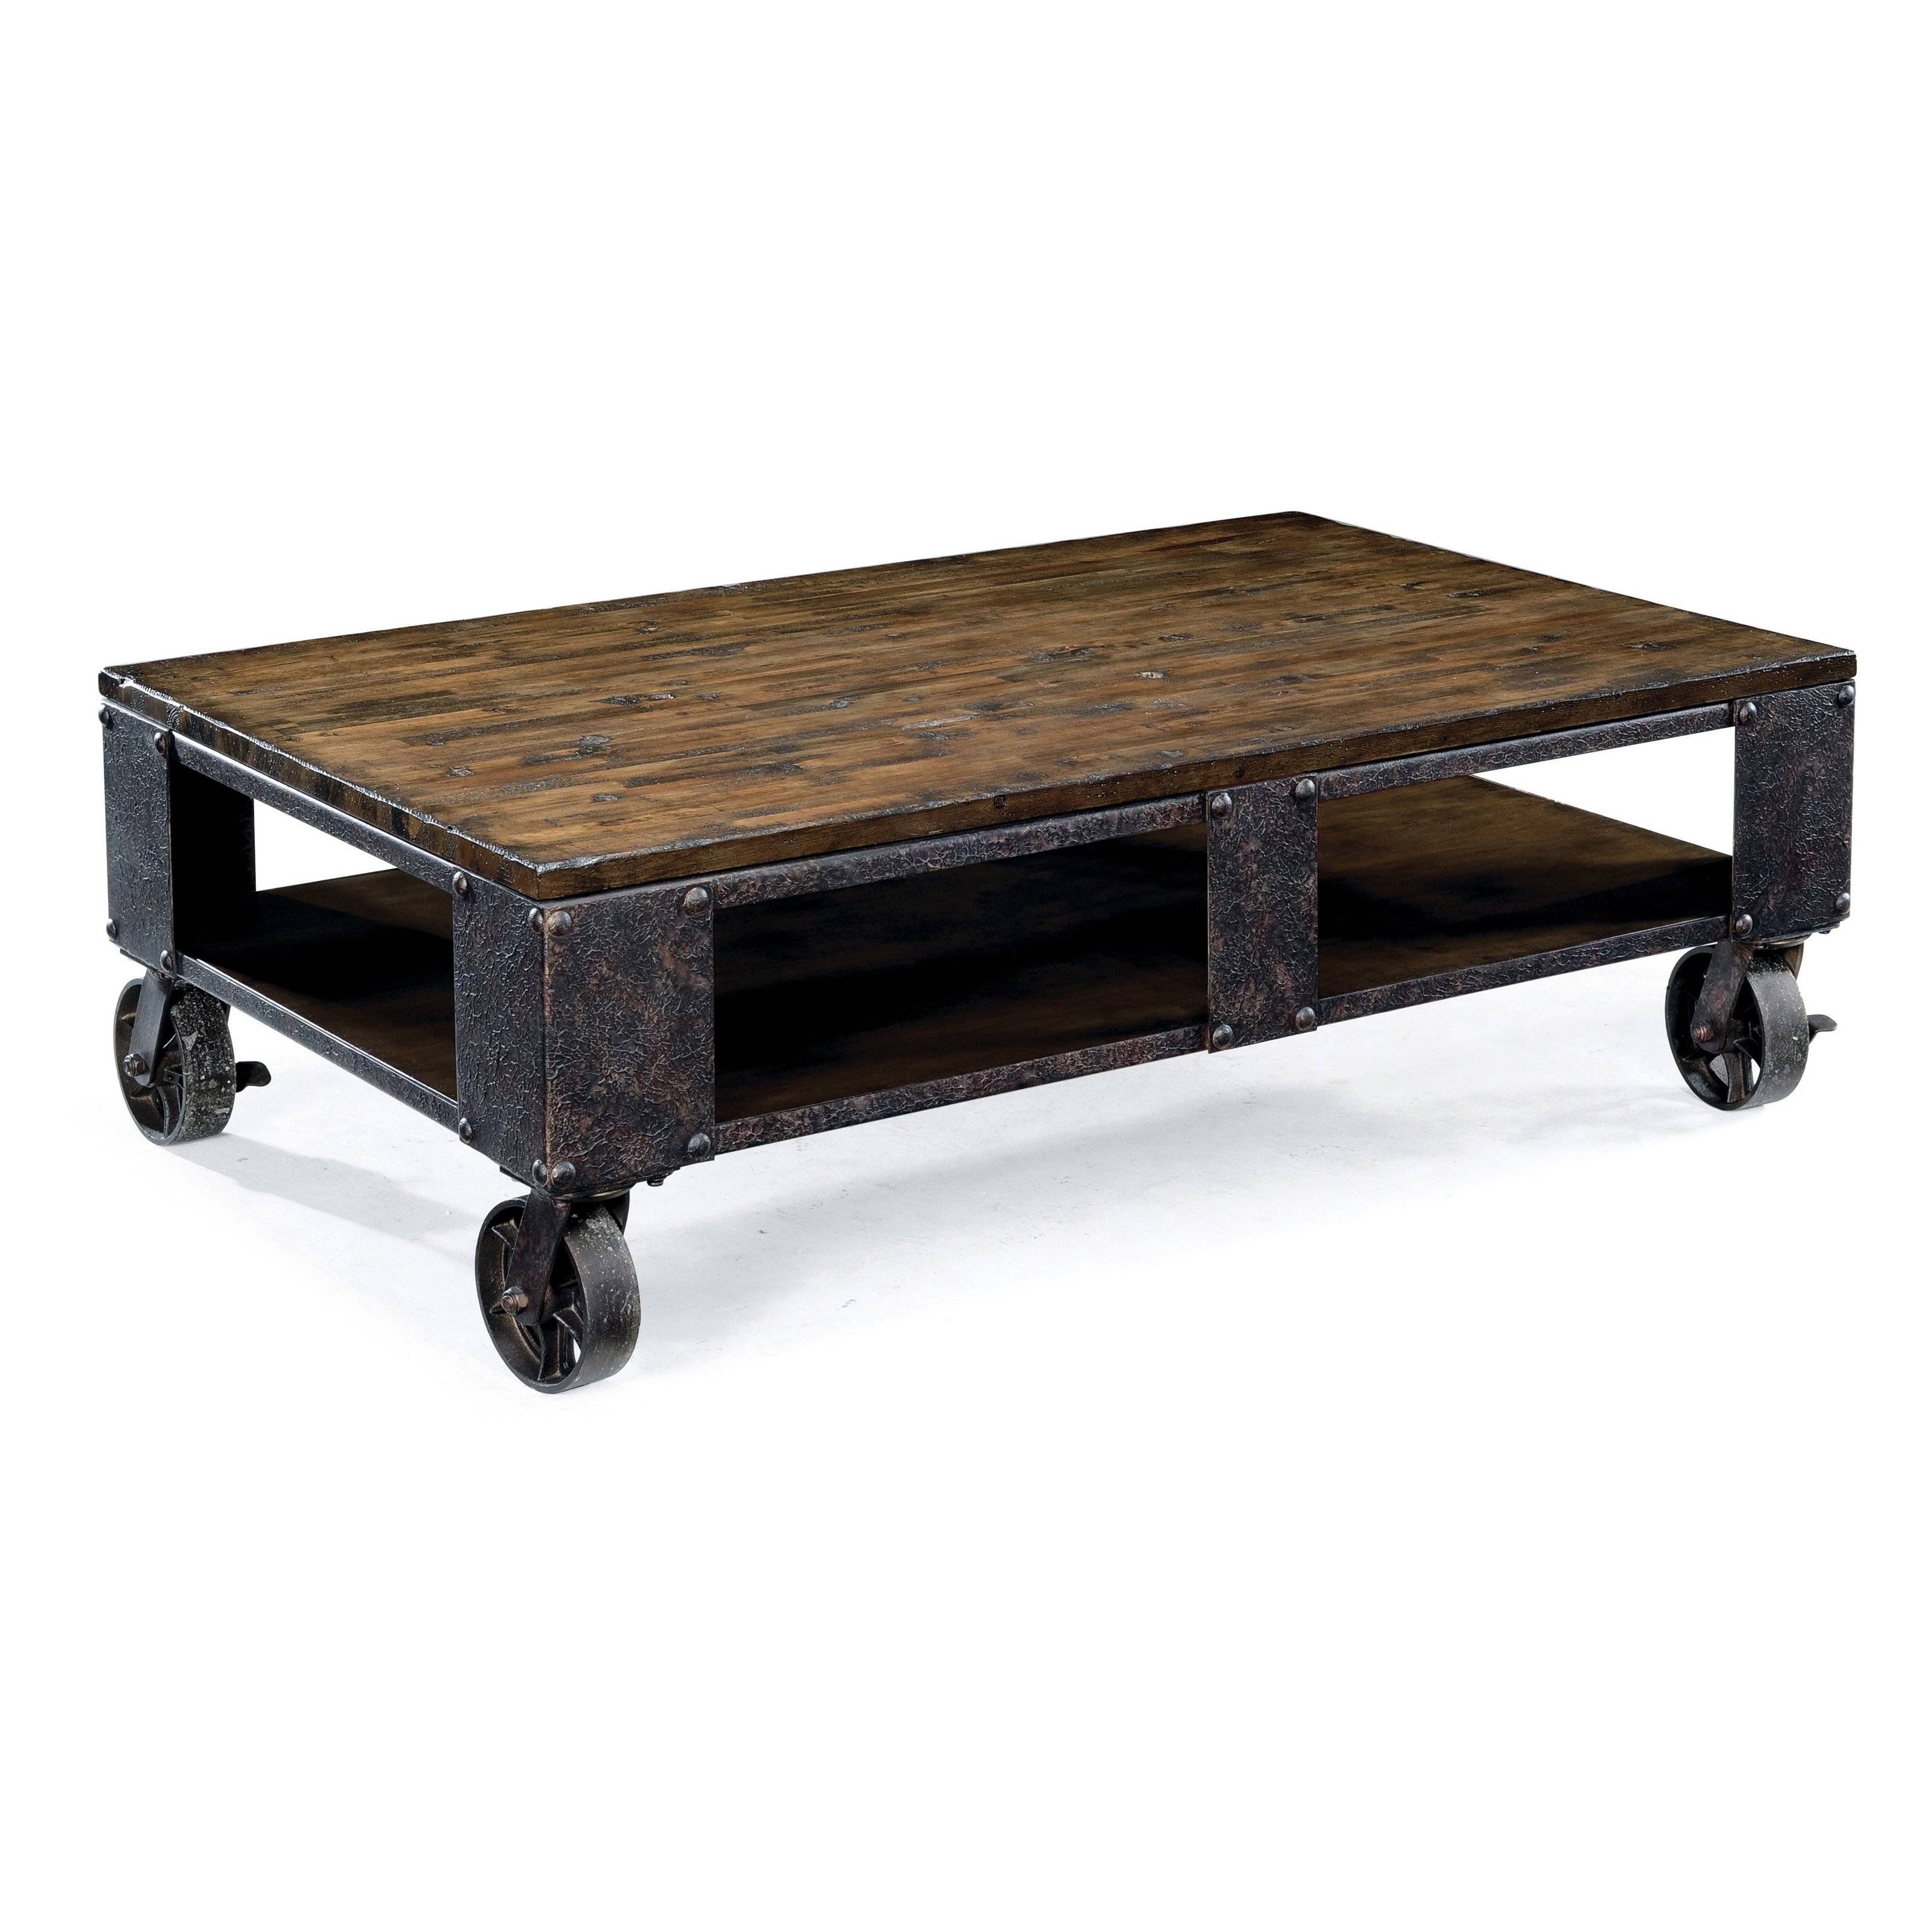 Coffee Table: Elegant Coffee Table On Wheels Design Ideas Modern Intended For Small Coffee Tables With Shelf (View 28 of 30)